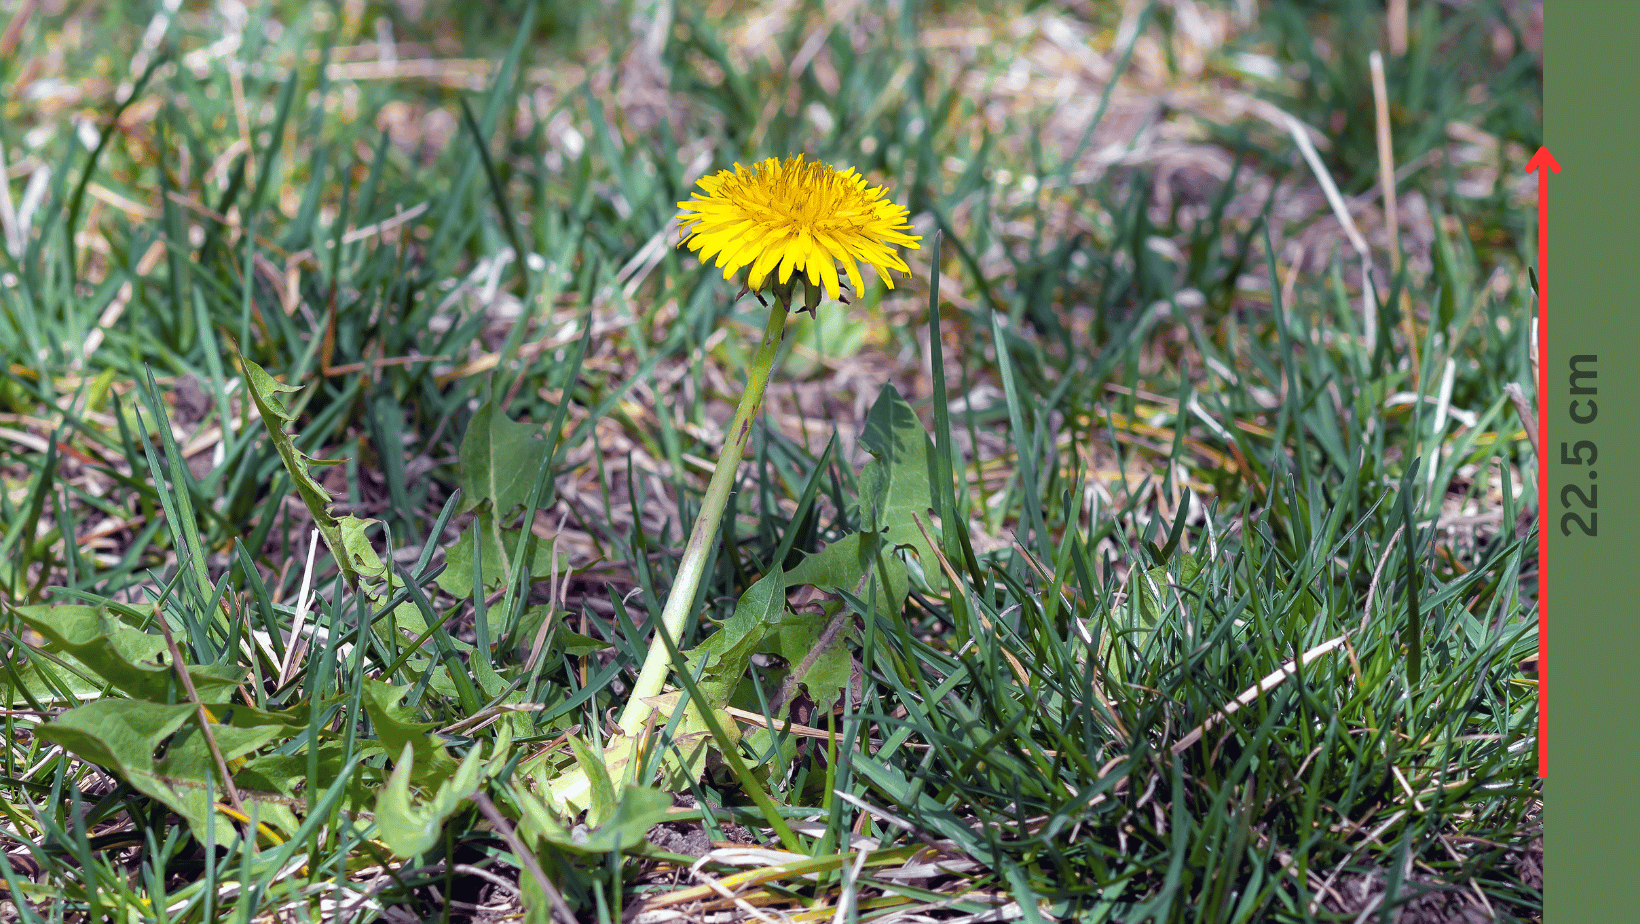 Dandelion in lawn with yellow flower